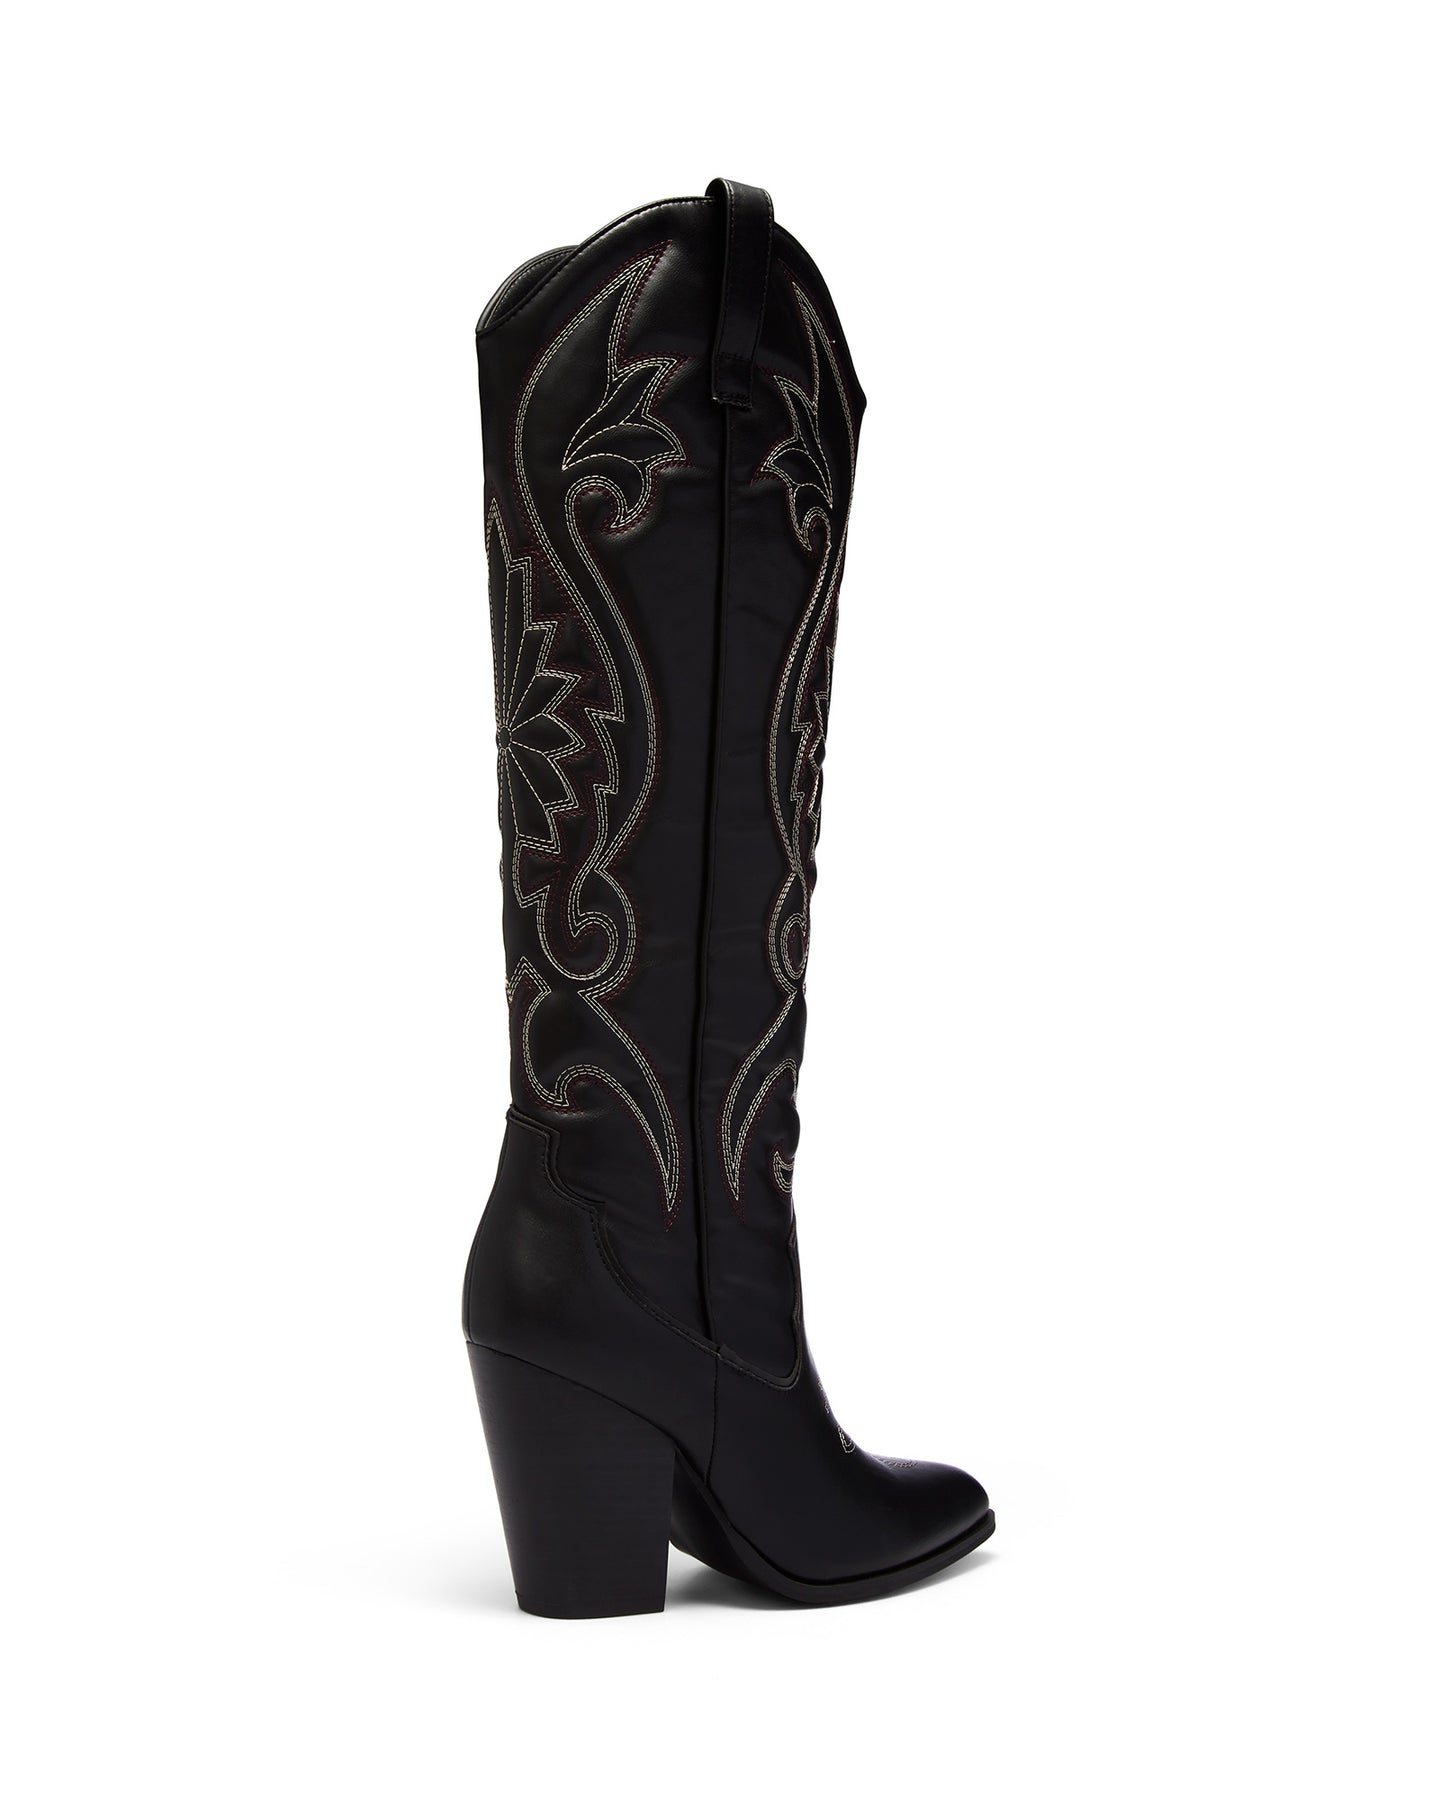 Wide Calf Black Leather Western Boots with Custom Stitching